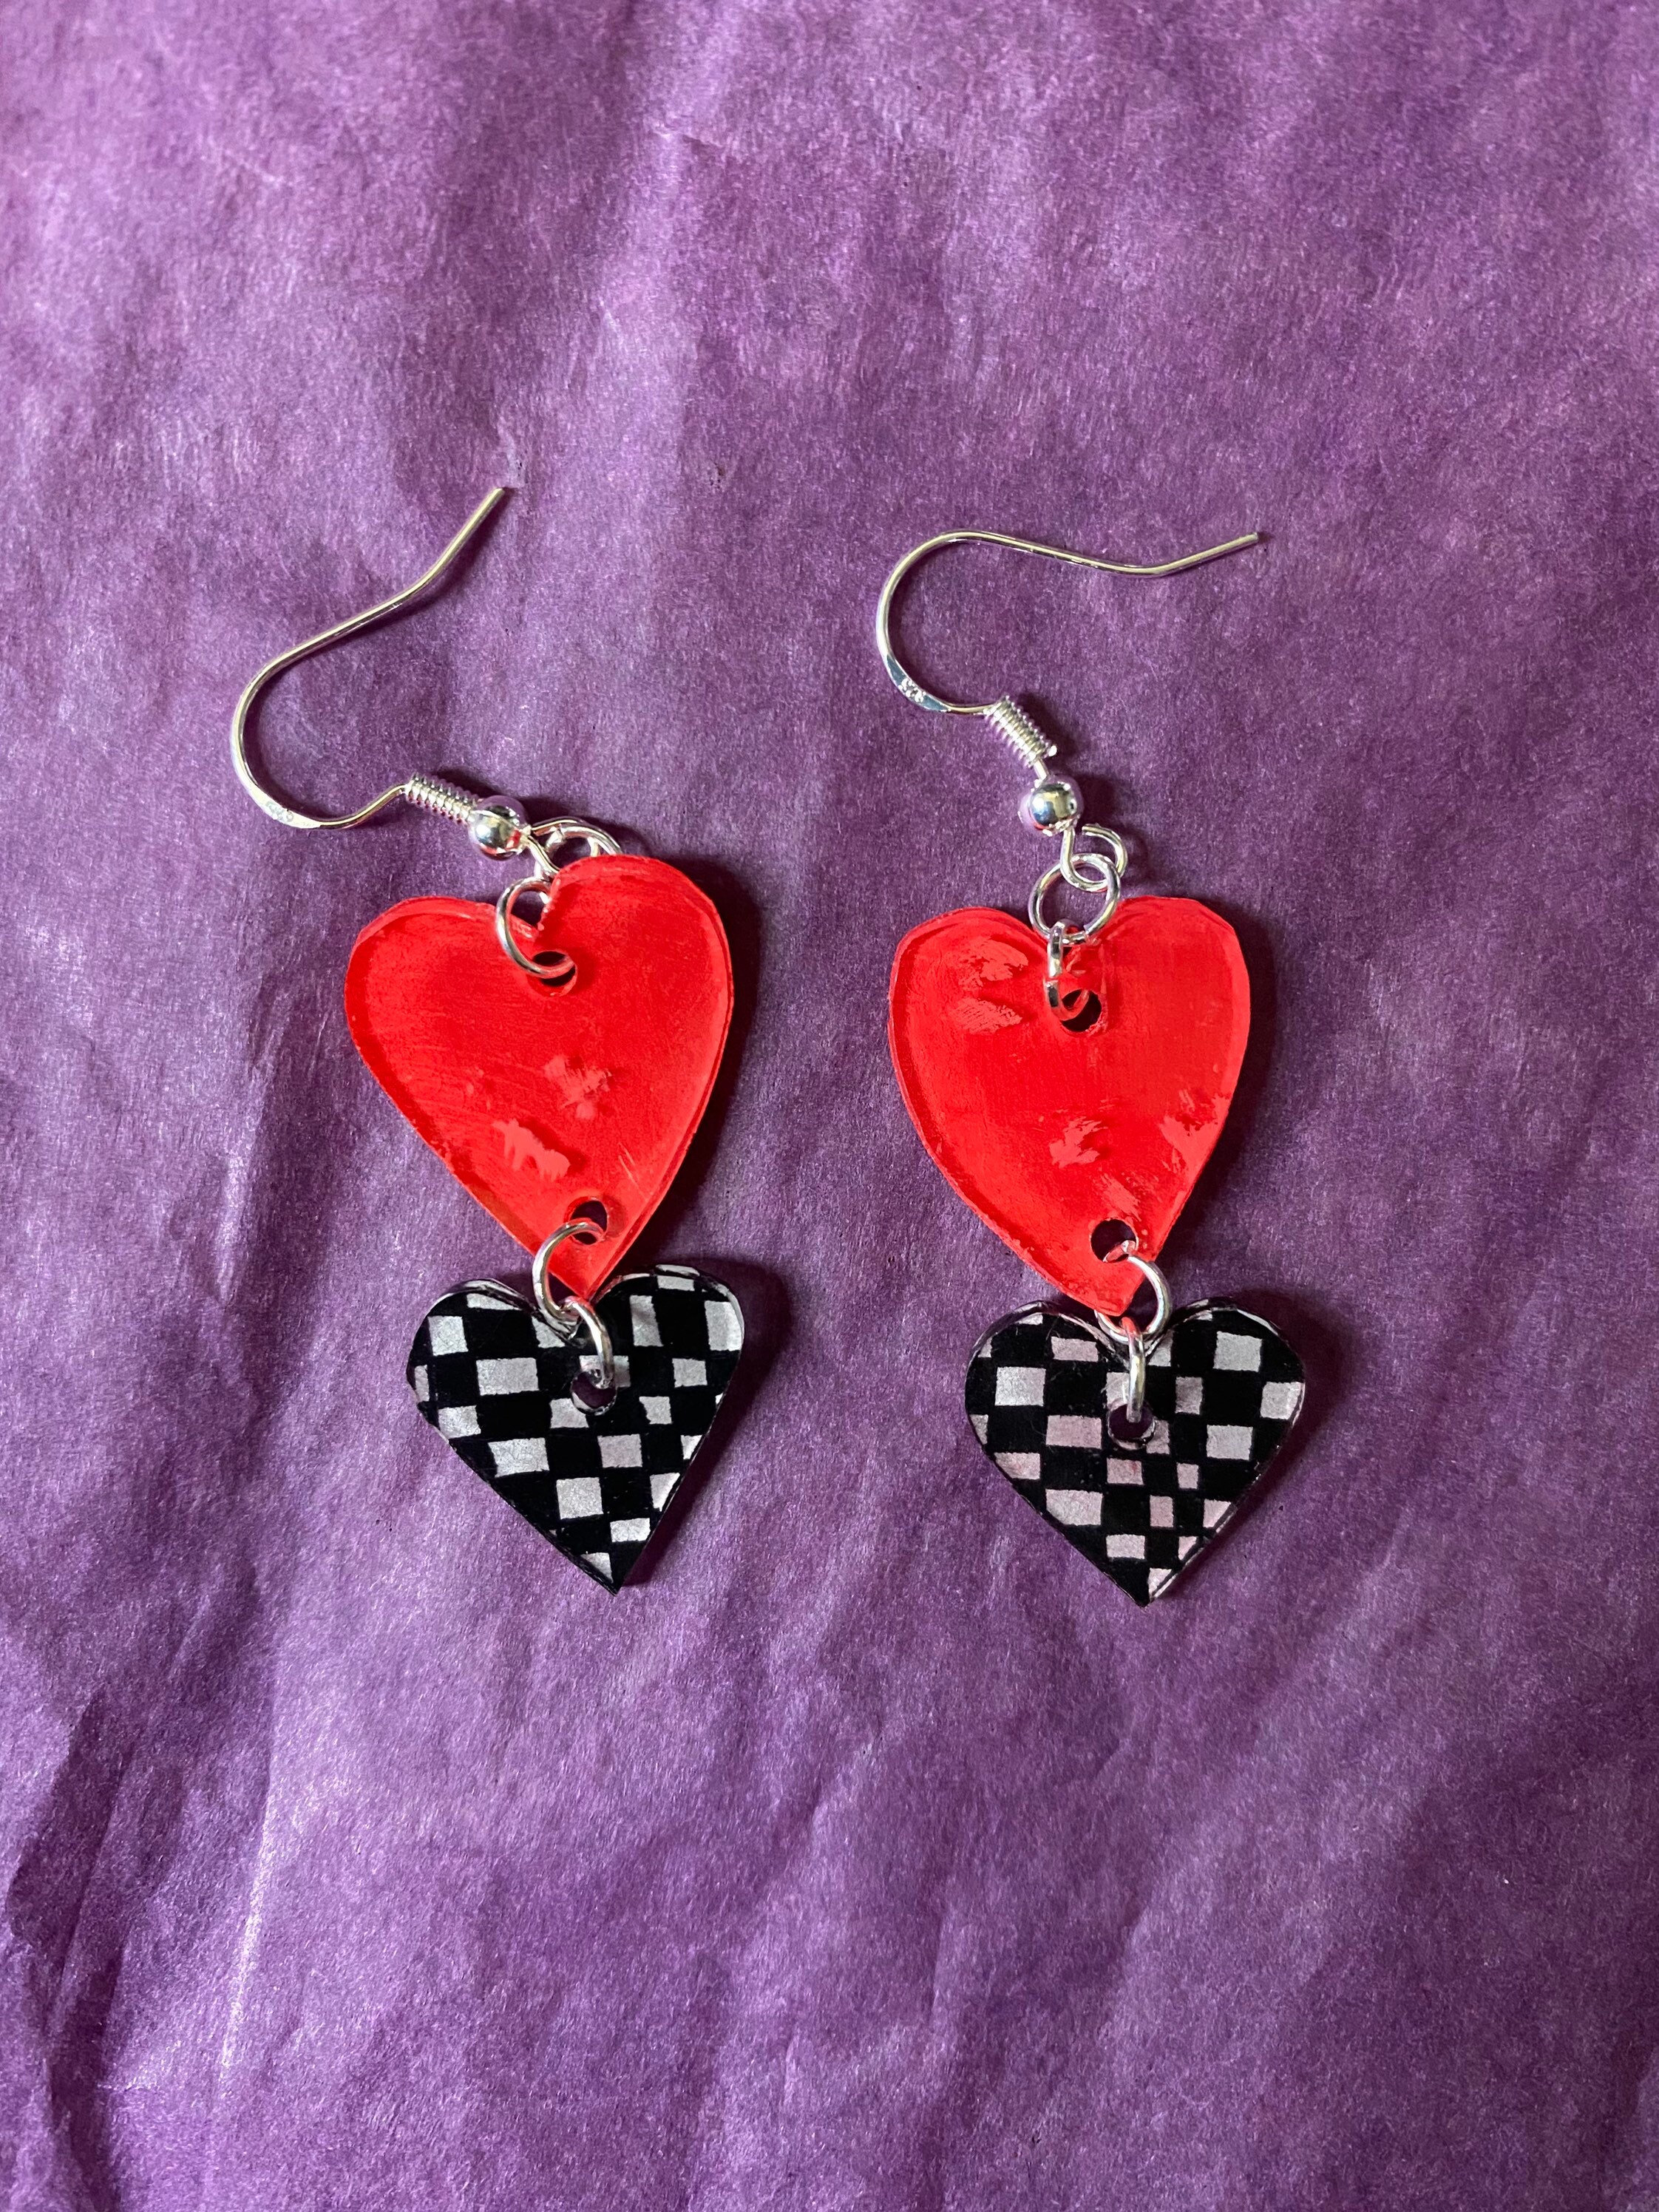 plastic shrink Heart earrings in crazy plastic plastic pink and red